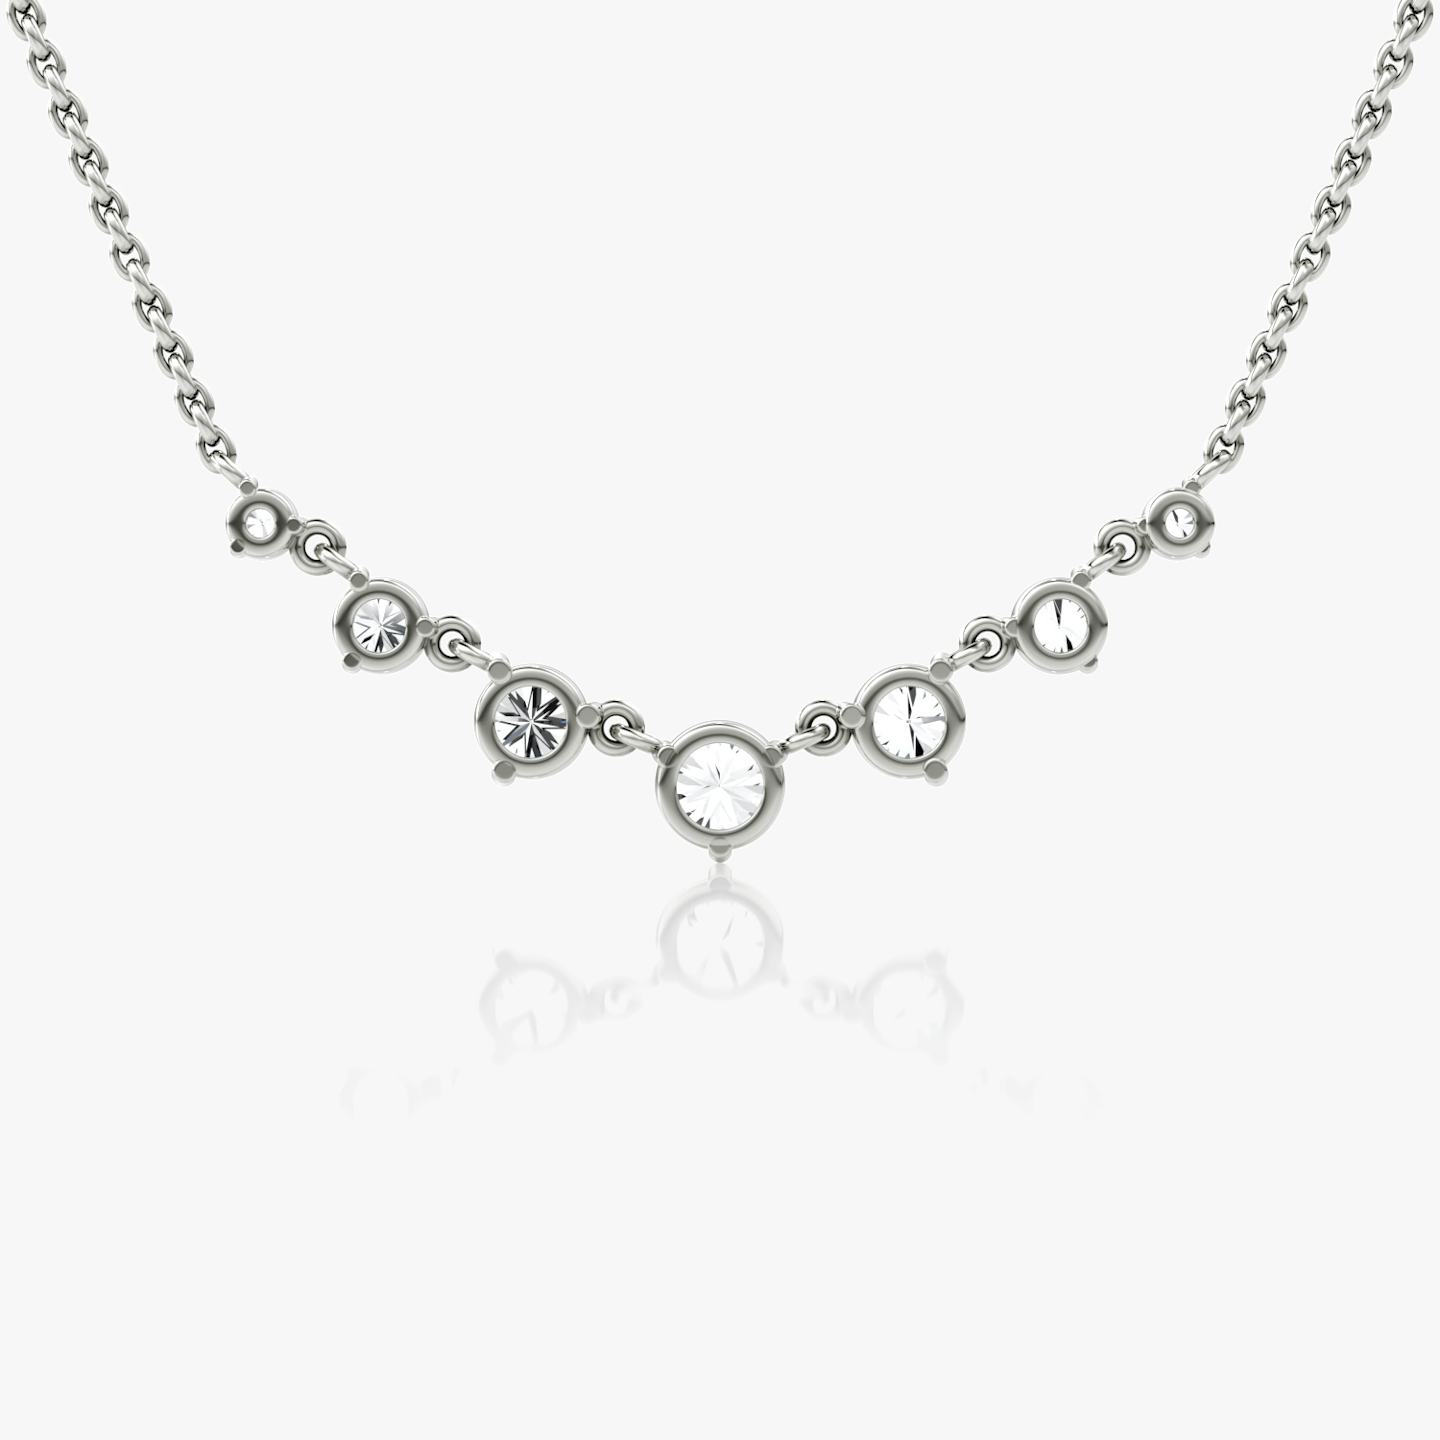 Linked Tennis Necklace | Round Brilliant | 14k | 18k White Gold | Chain length: 16-18